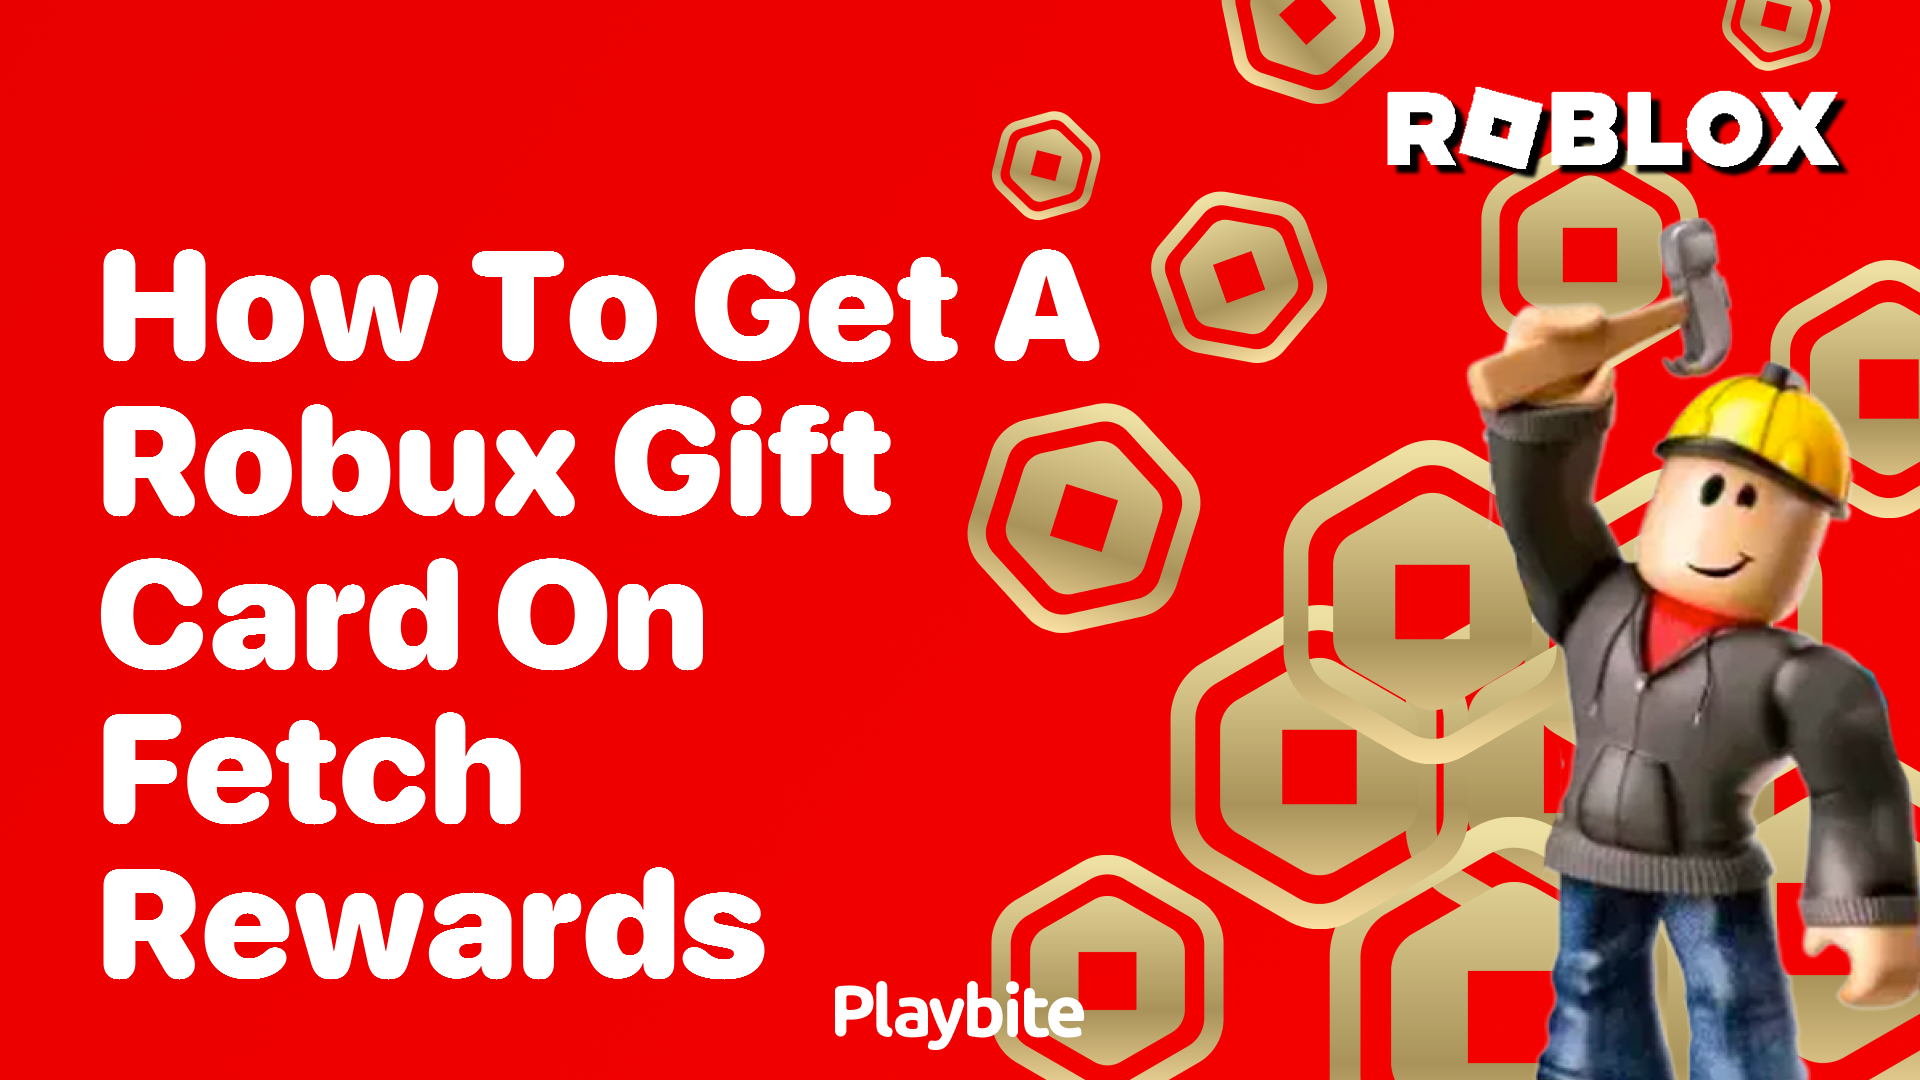 How to Get a Robux Gift Card on Fetch Rewards